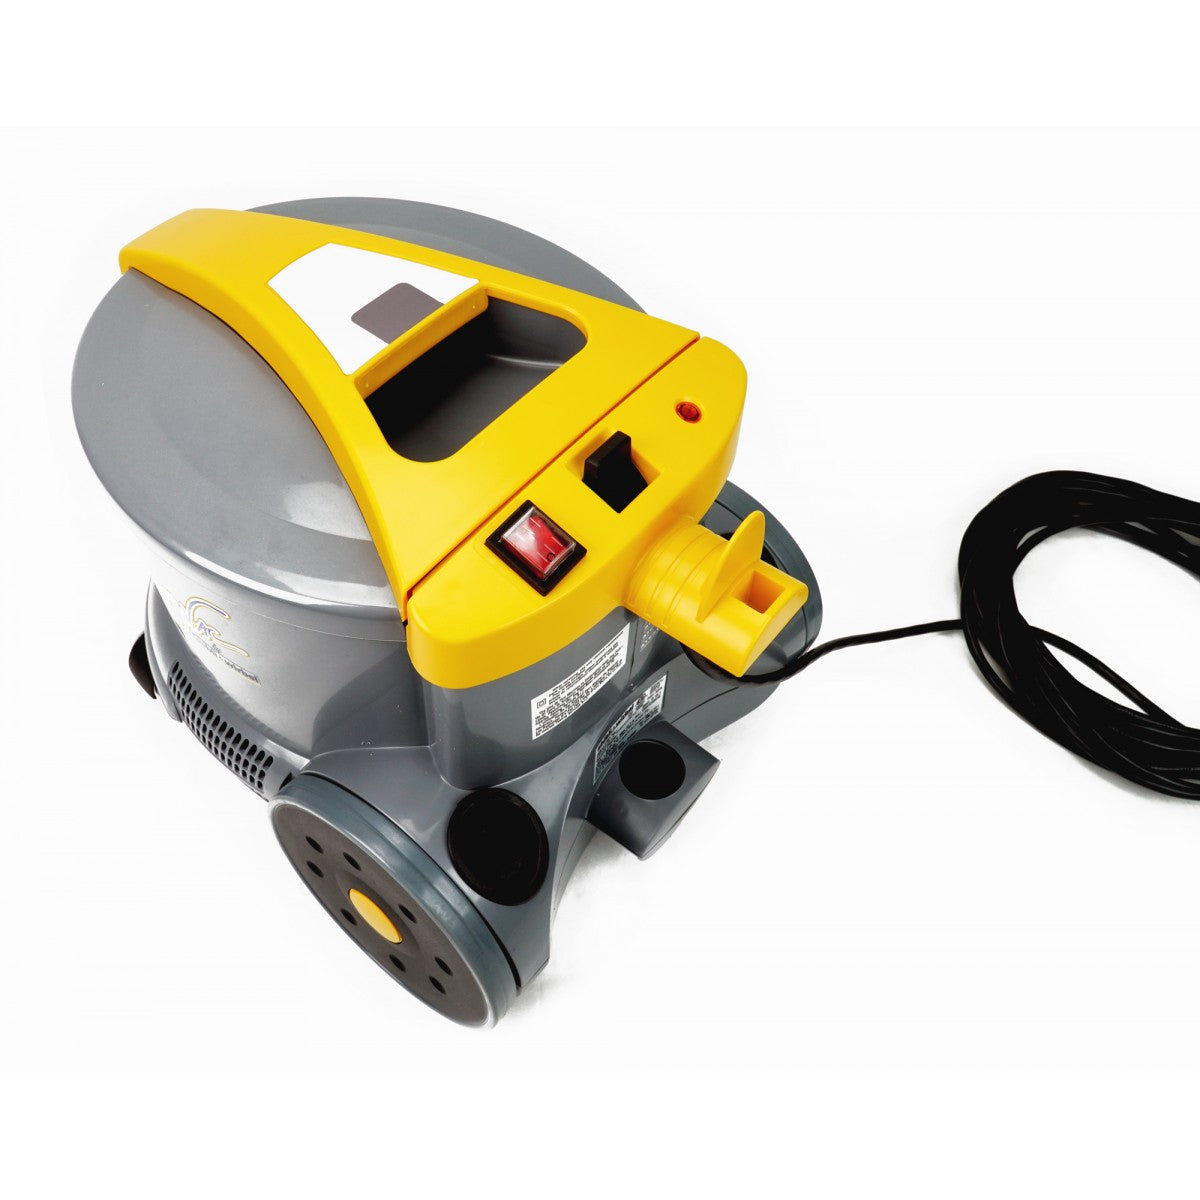 Johnny Vac AS6 Commercial Canister Vacuum - Power Supply